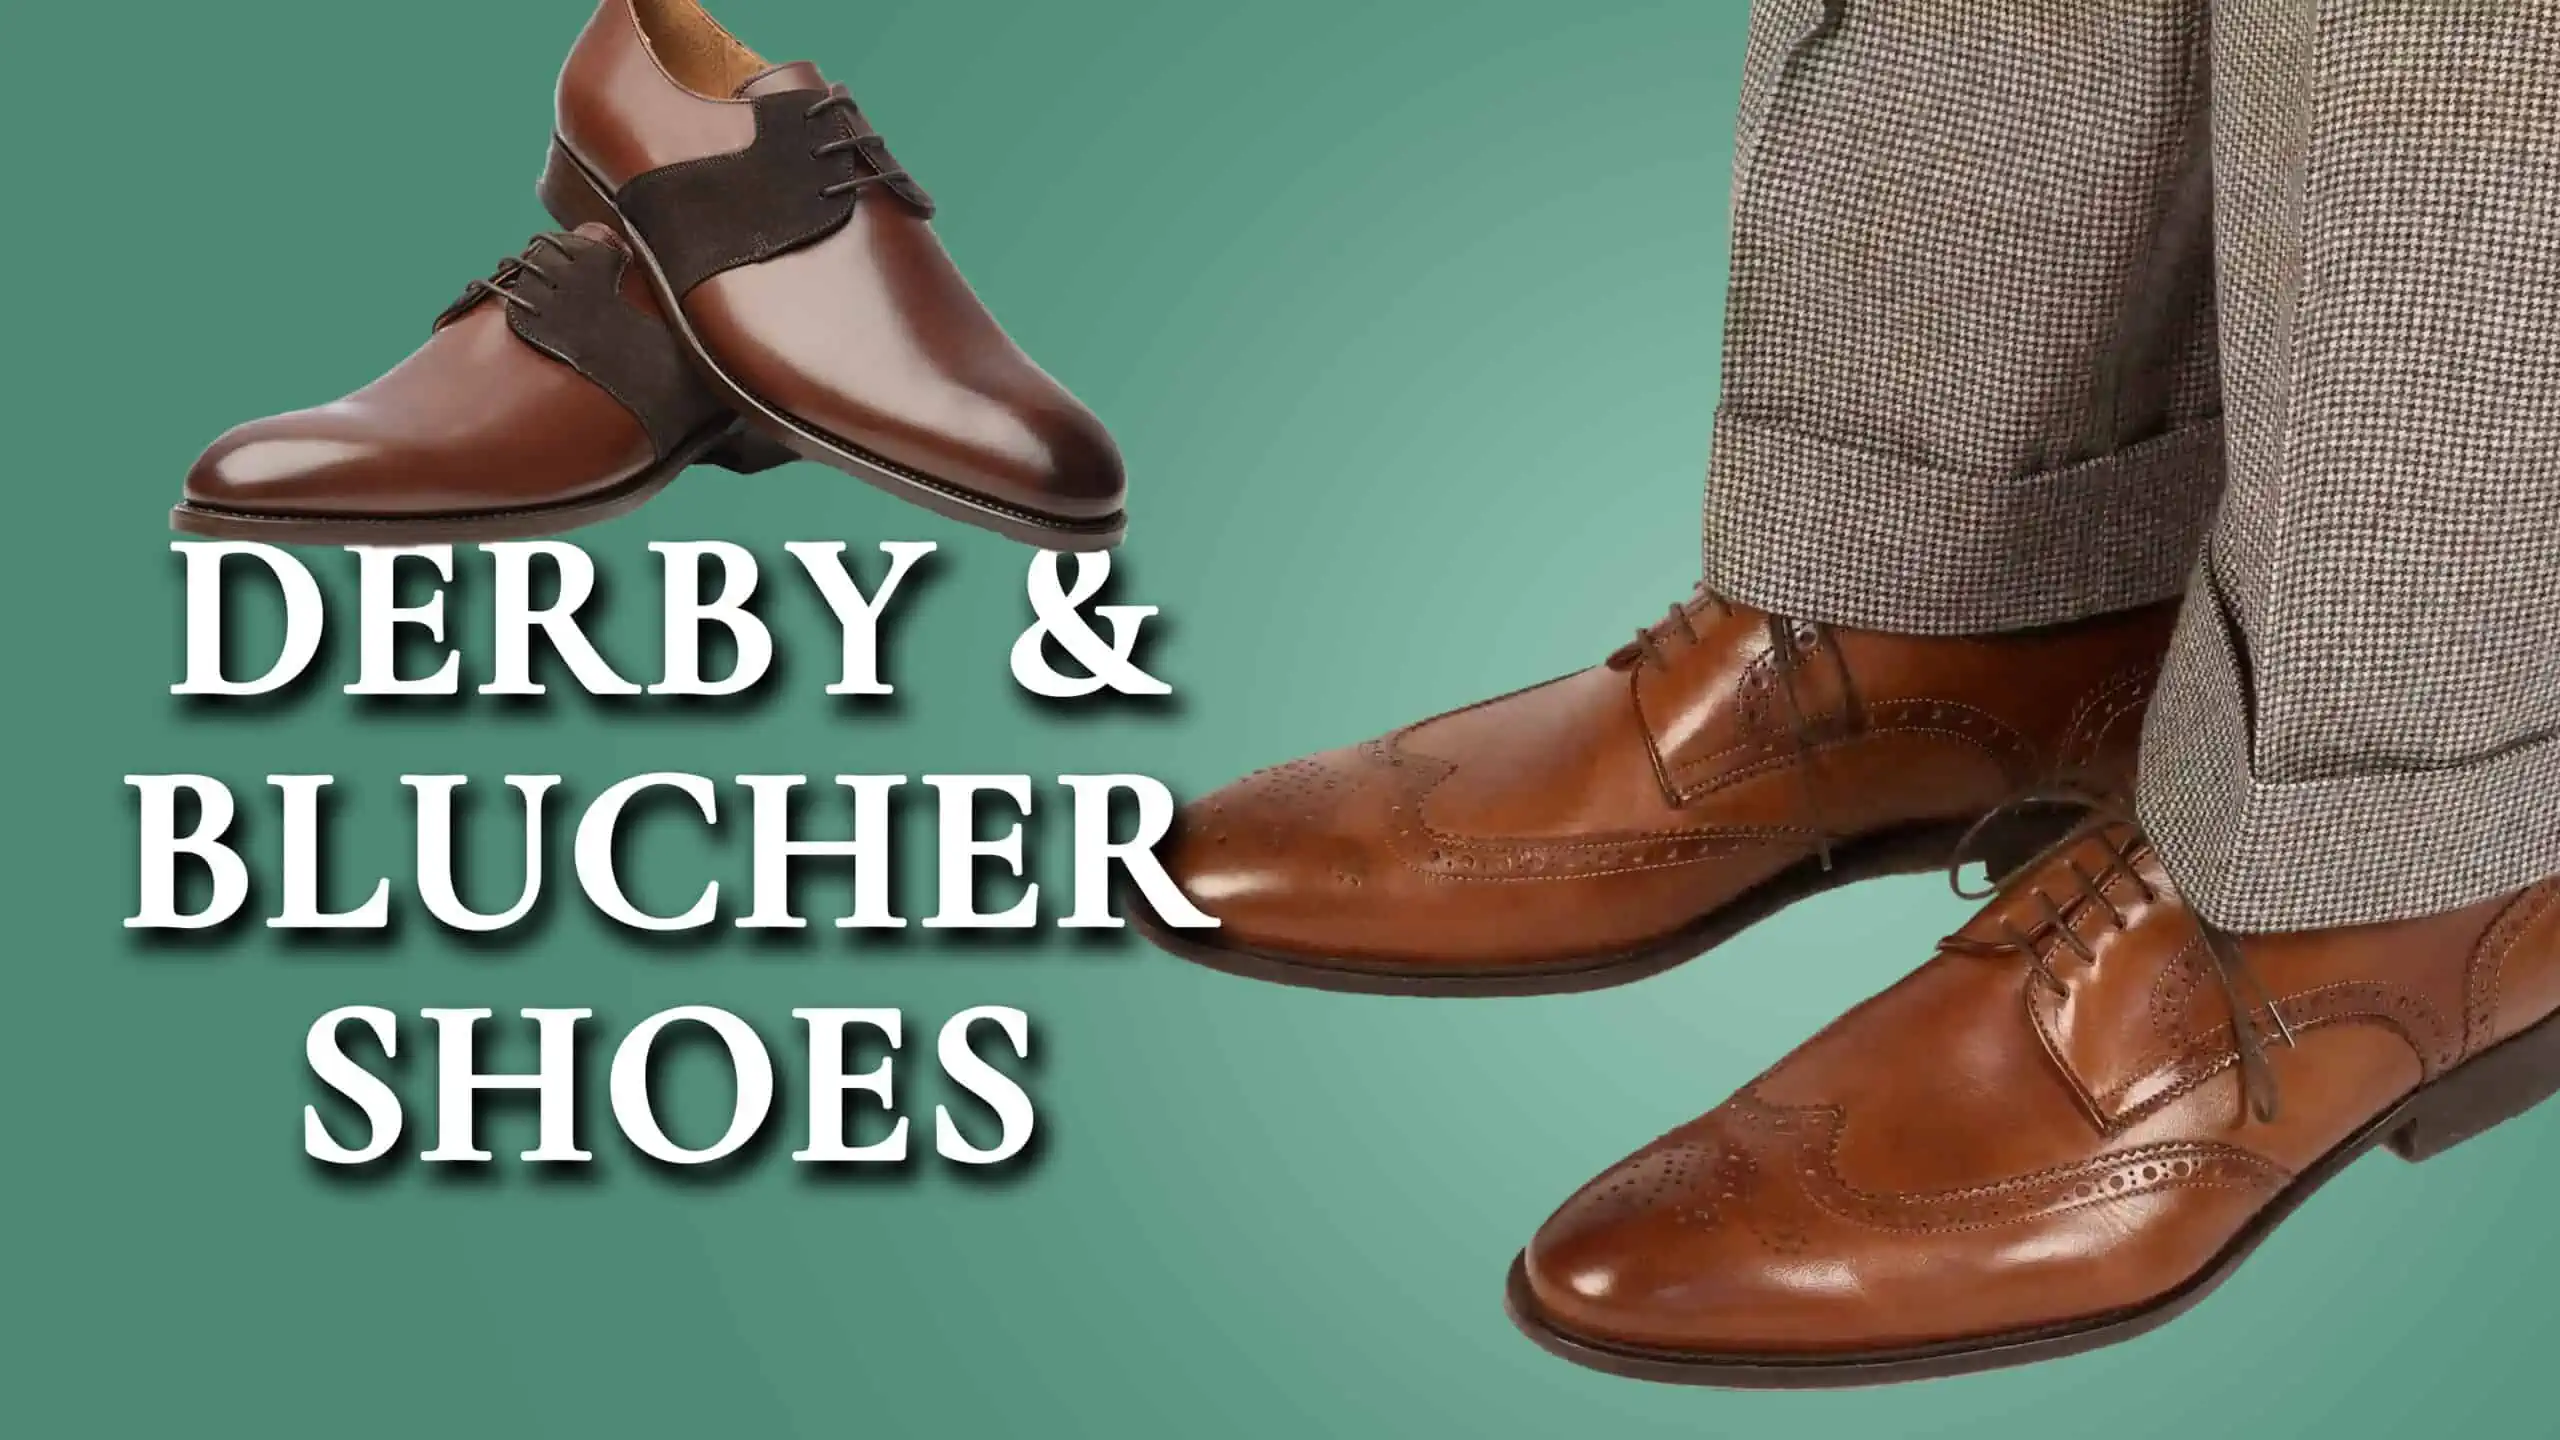 How To Style Derby Shoes - Women's Fashion